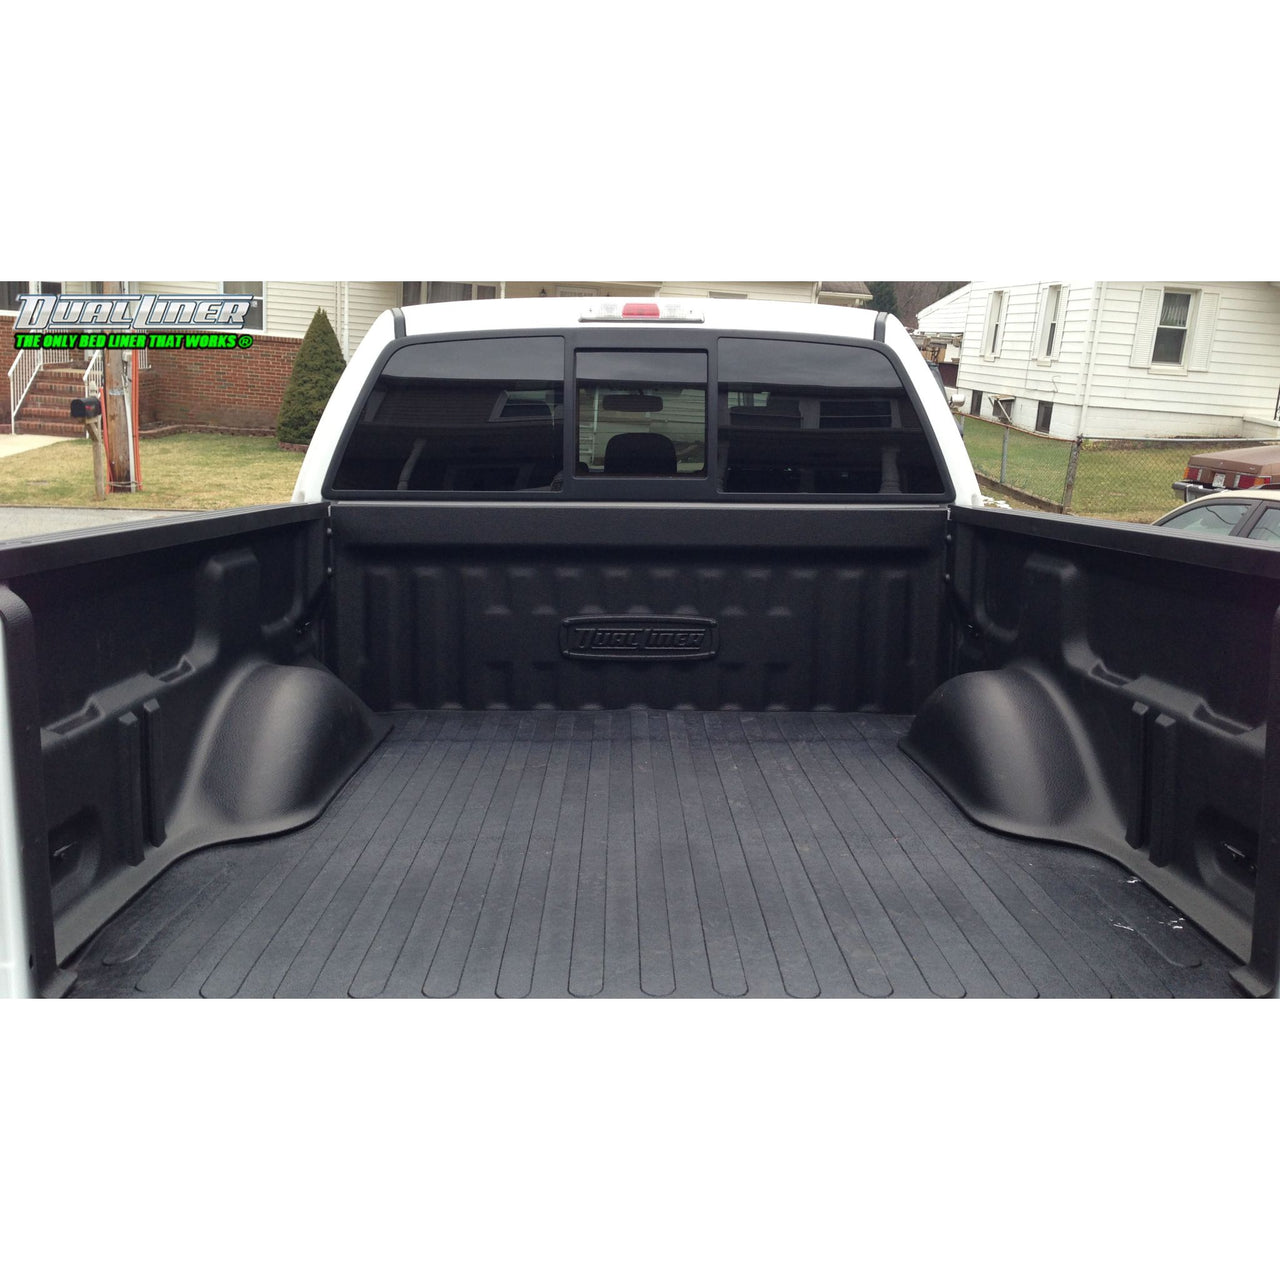 DualLiner 2015 to 2020 F-150 (WITH LED Light Bar) - Long 8' Bed